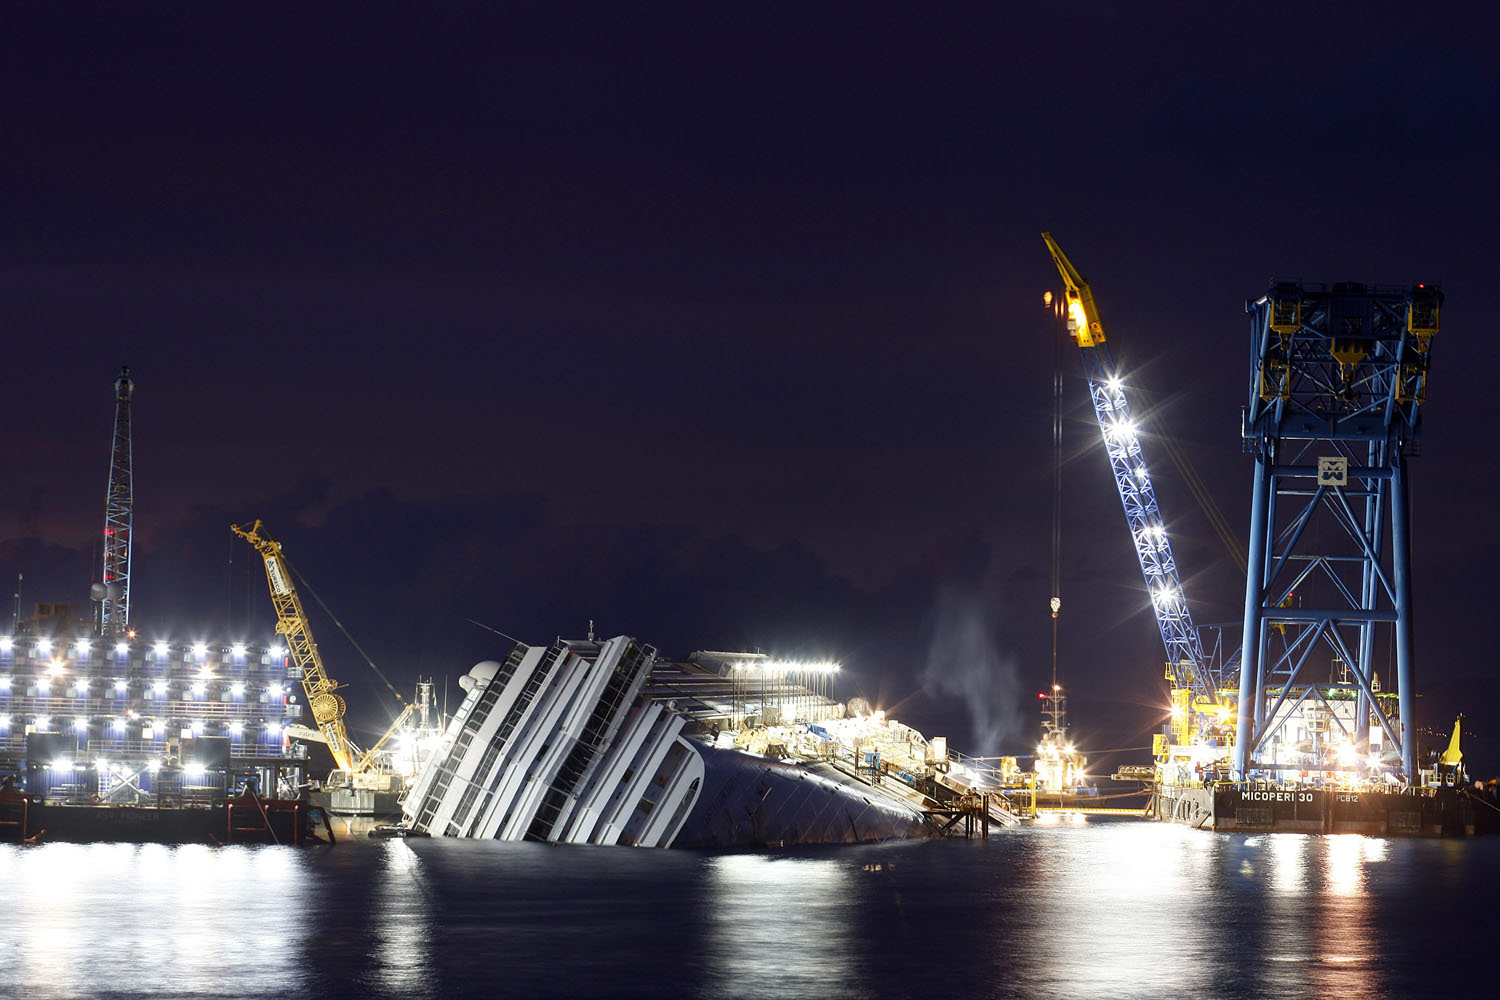 Image: Nov. 6, 2012. The capsized cruise liner Costa Concordia is seen surrounded by cranes during a rescue operation in front of Giglio harbour.